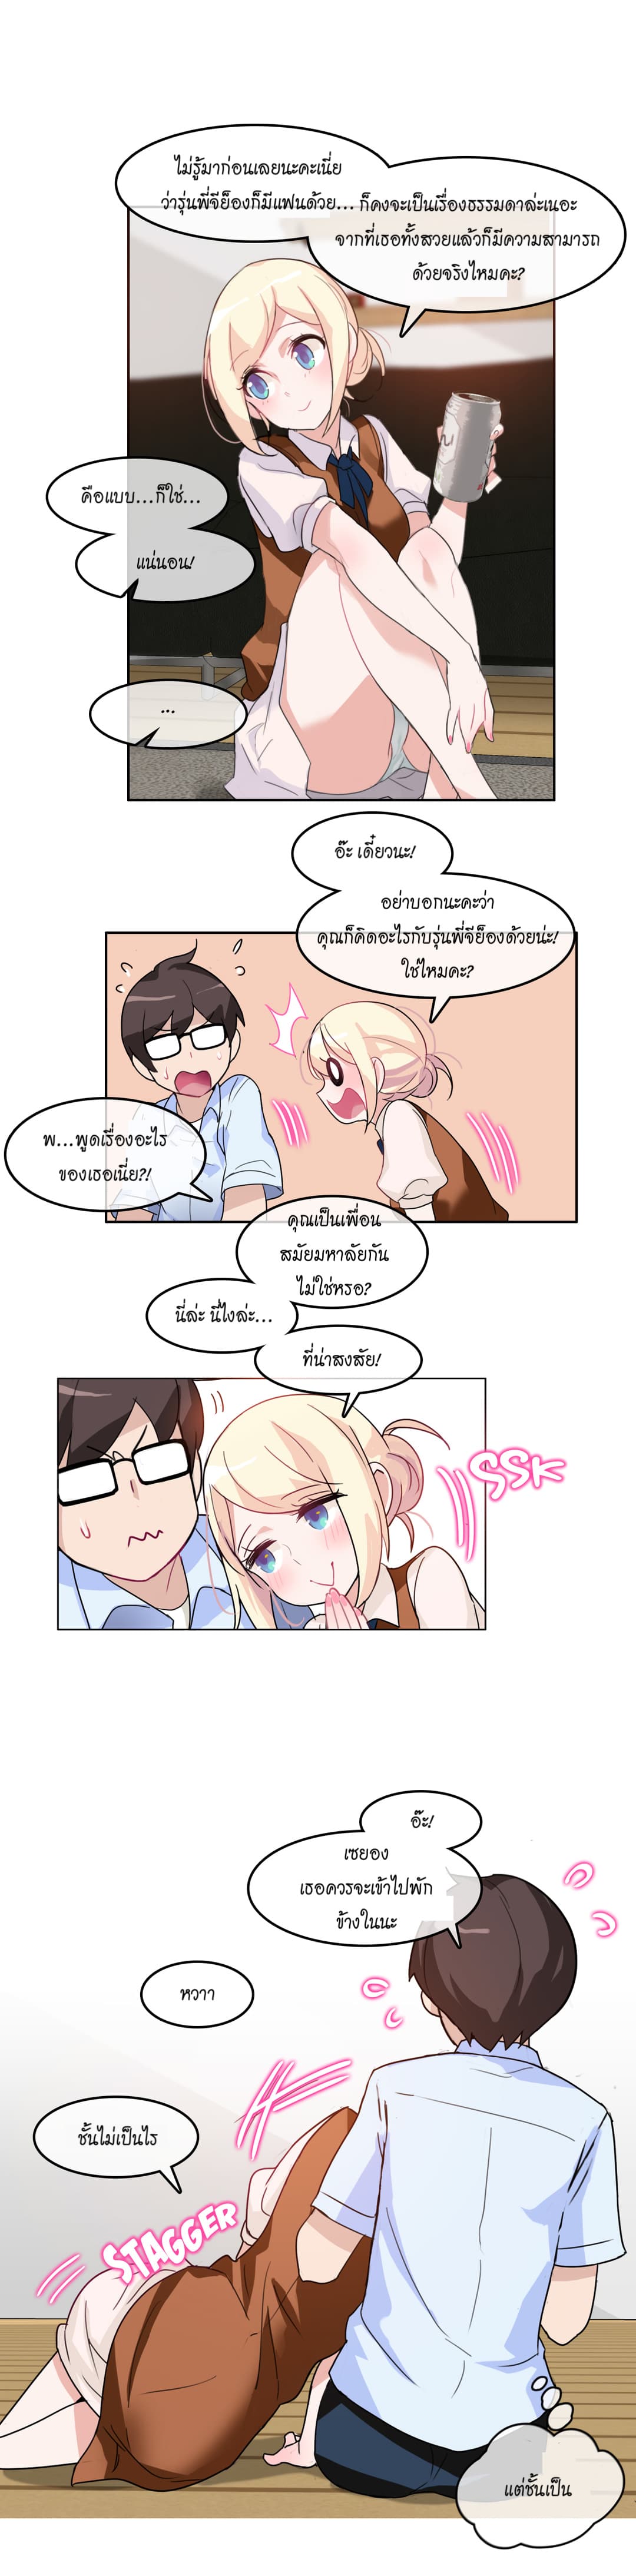 A Pervert’s Daily Life 9 (12)